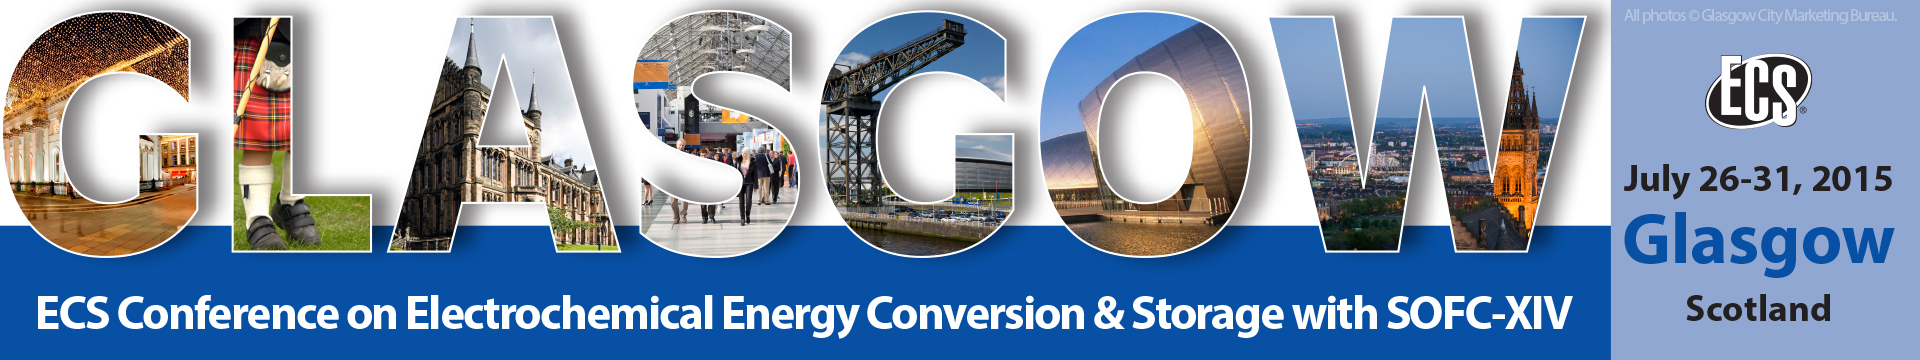 ECS Conference on Electrochemical Energy Conversion & Storage with SOFC-XIV (July 26-31, 2015): http://www.electrochem.org/meetings/satellite/glasgow/